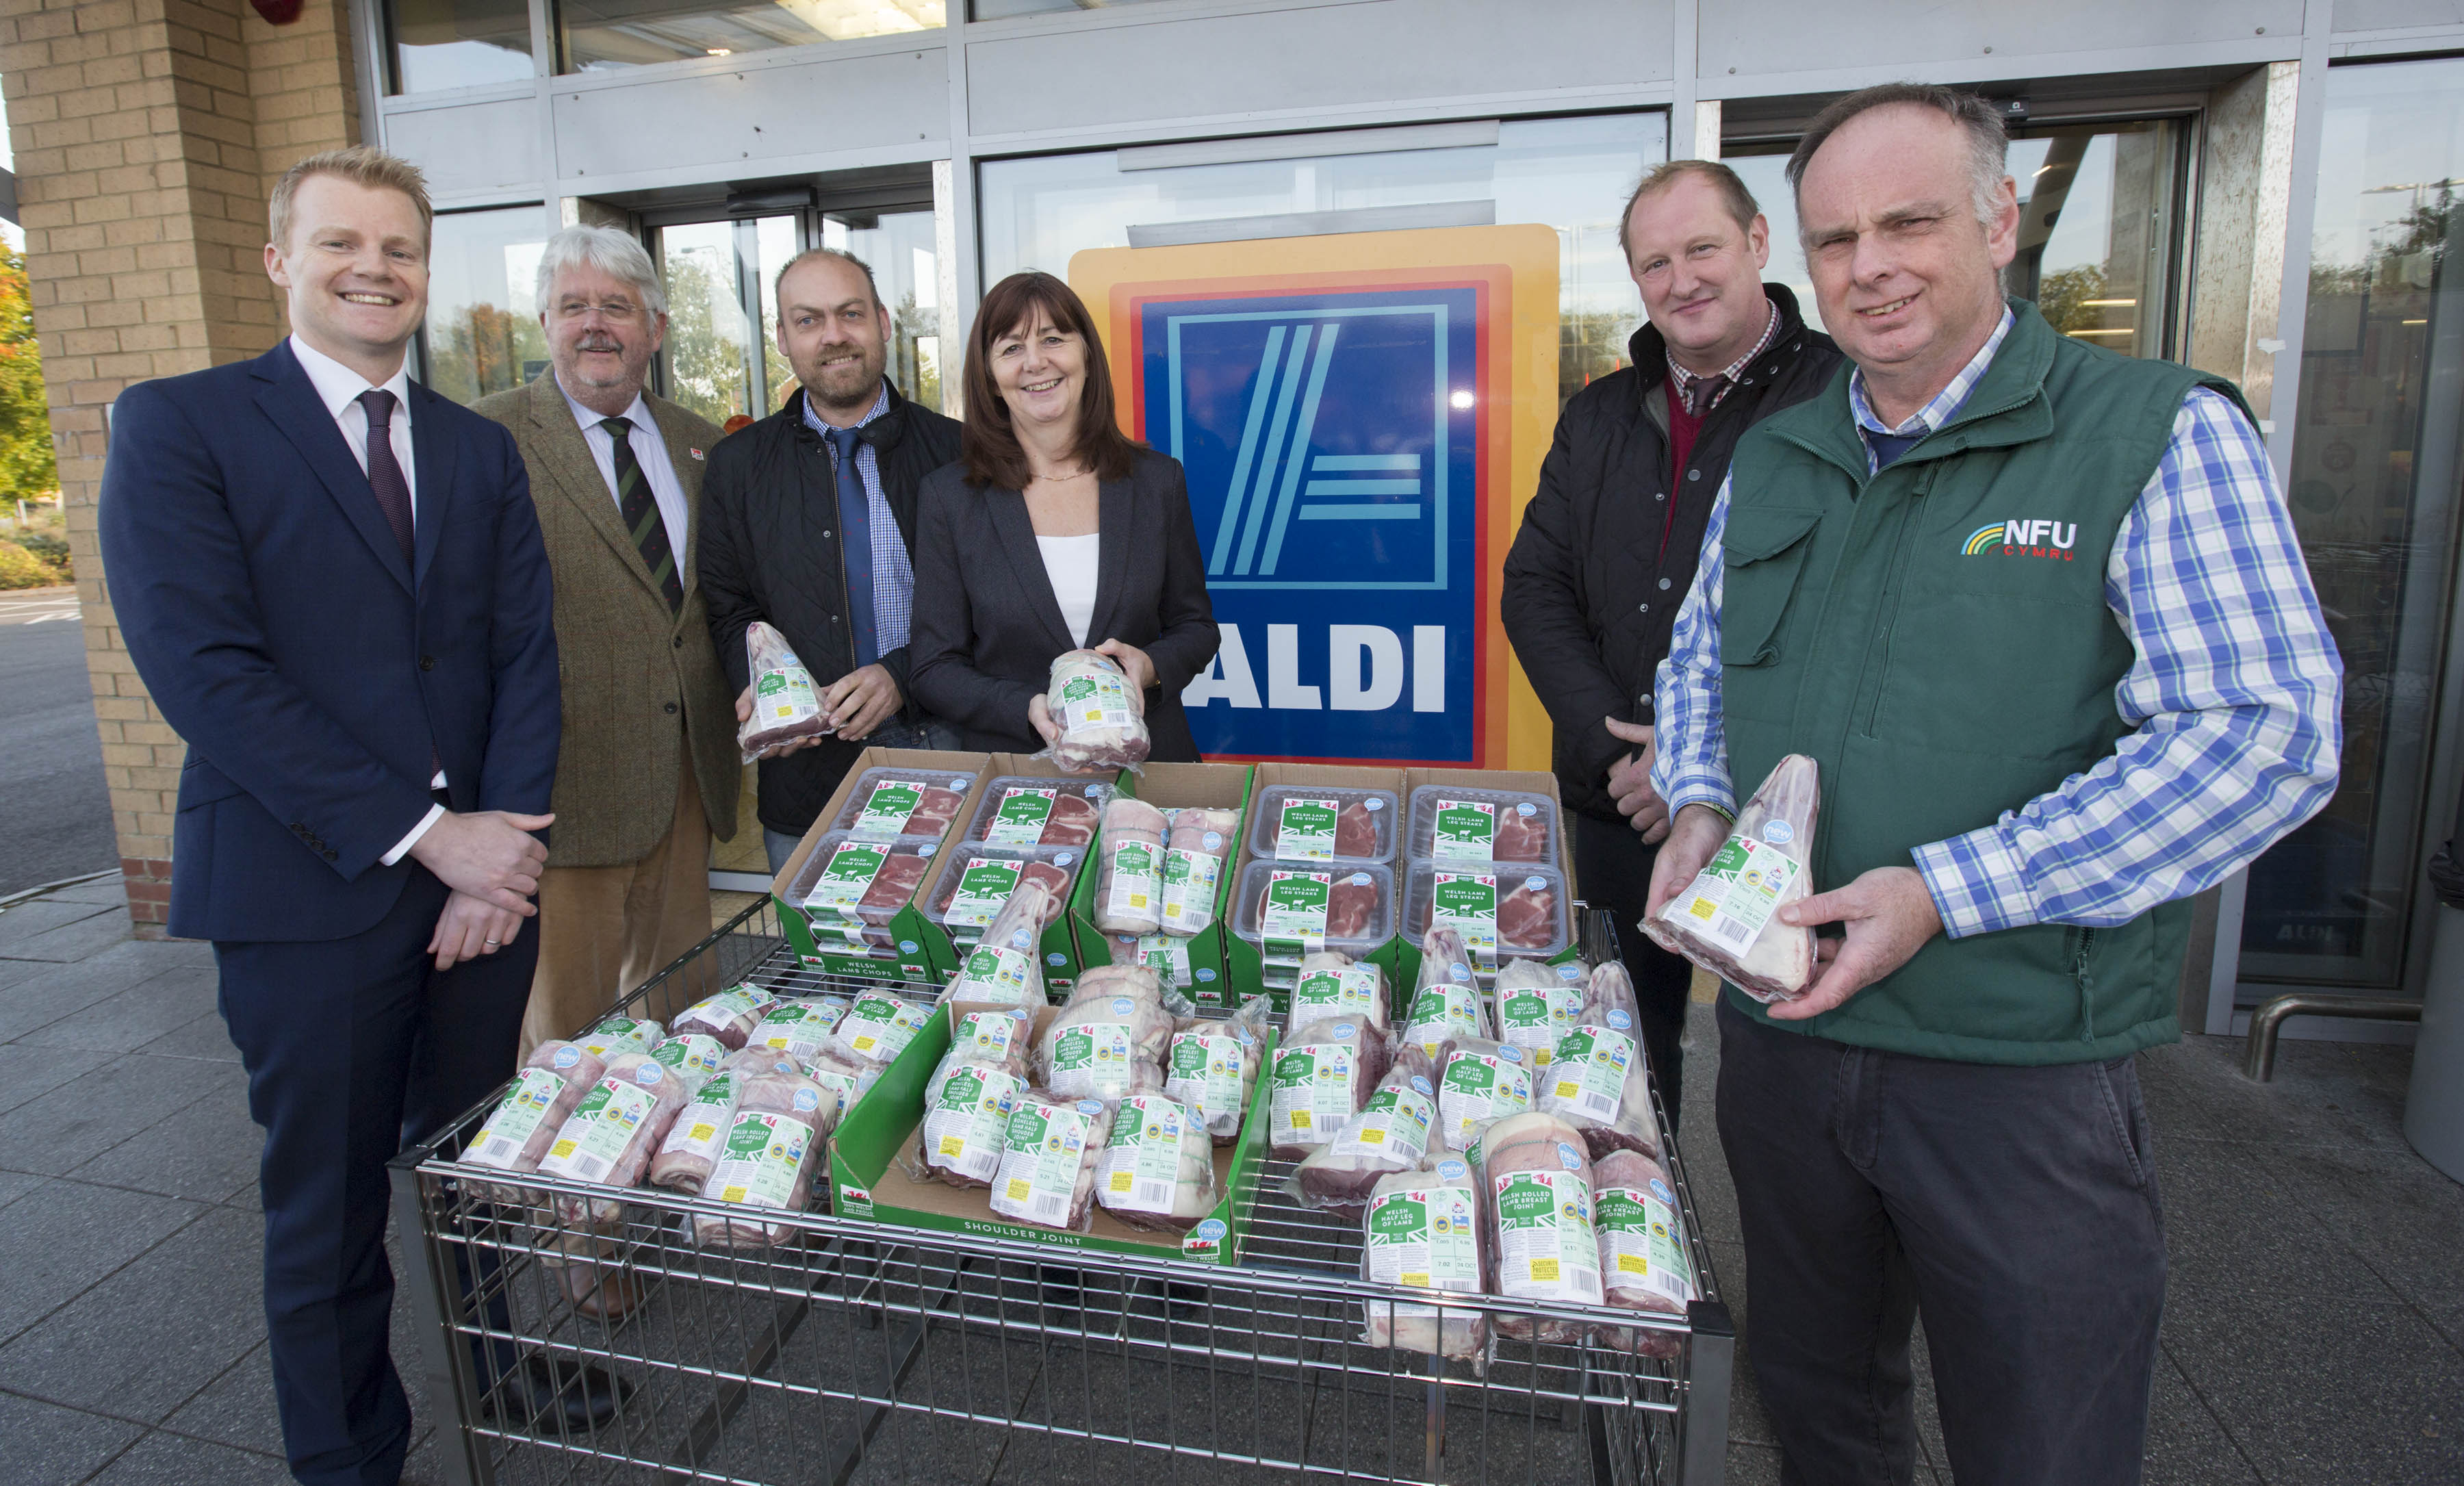 The Welsh farming union welcomes Aldi announcement, but 'more commitment is needed'